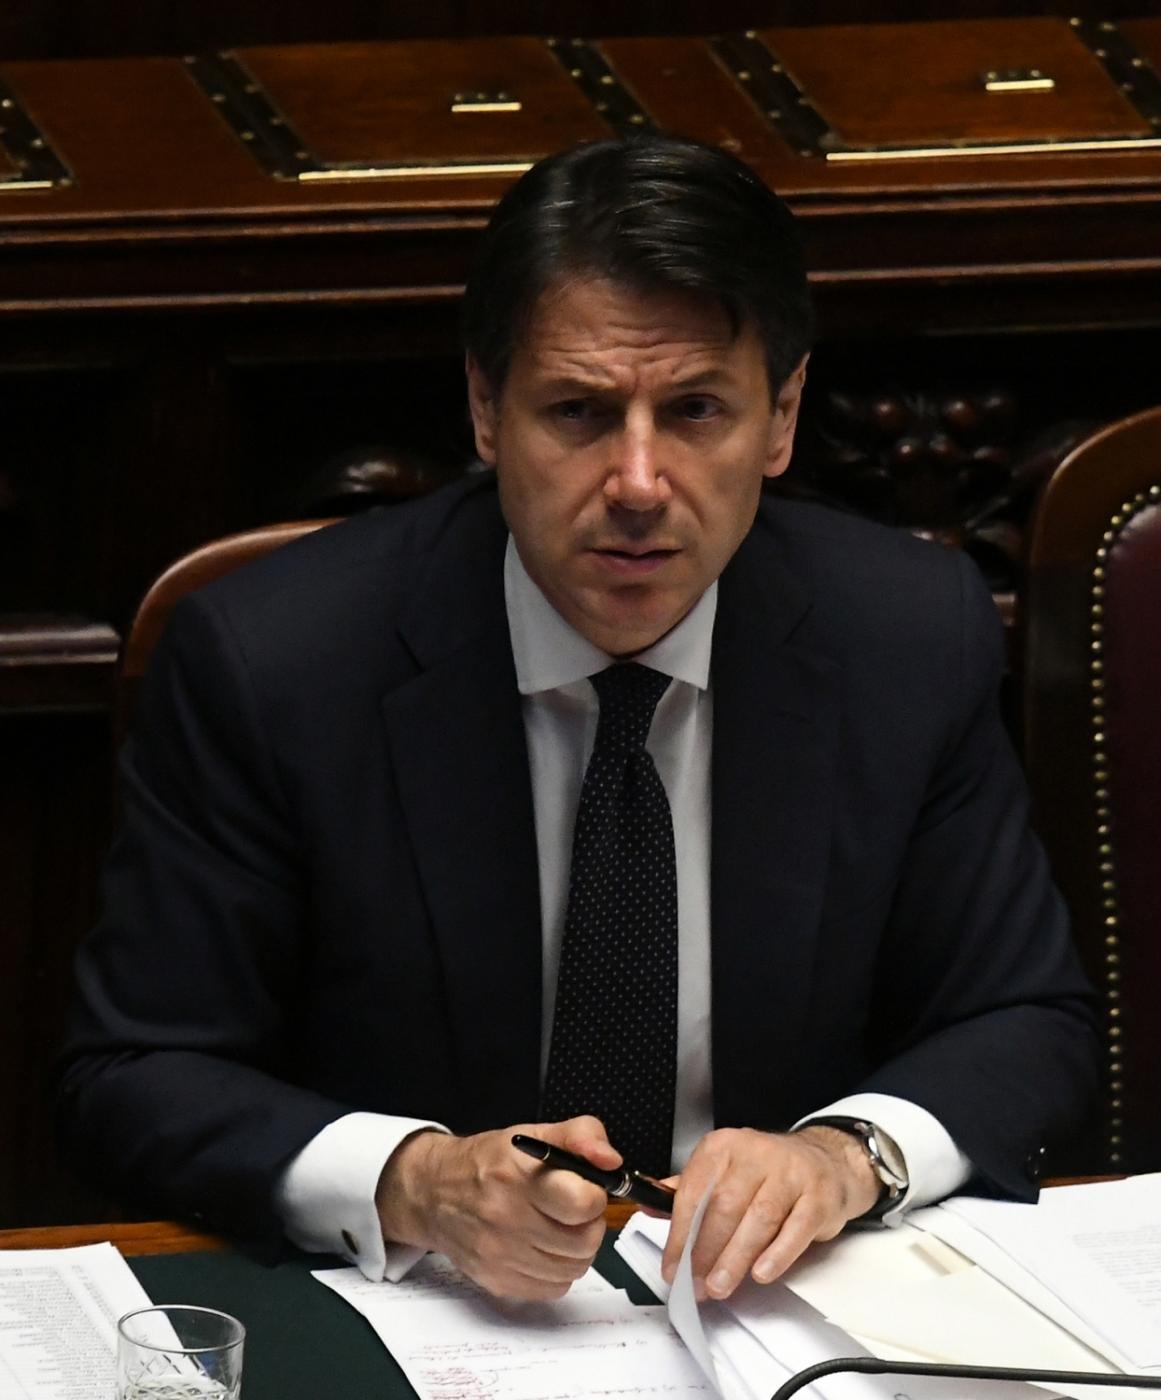 ROME, June 6, 2018 (Xinhua) -- Italian Prime Minister Giuseppe Conte is seen in the lower house of Italy's parliament in Rome, Italy, on June 6, 2018. The new Italian government cleared its second administrative hurdle on Wednesday, winning a confidence vote in the lower house of Italy's parliament. (Xinhua/Alberto Lingria/IANS) by .